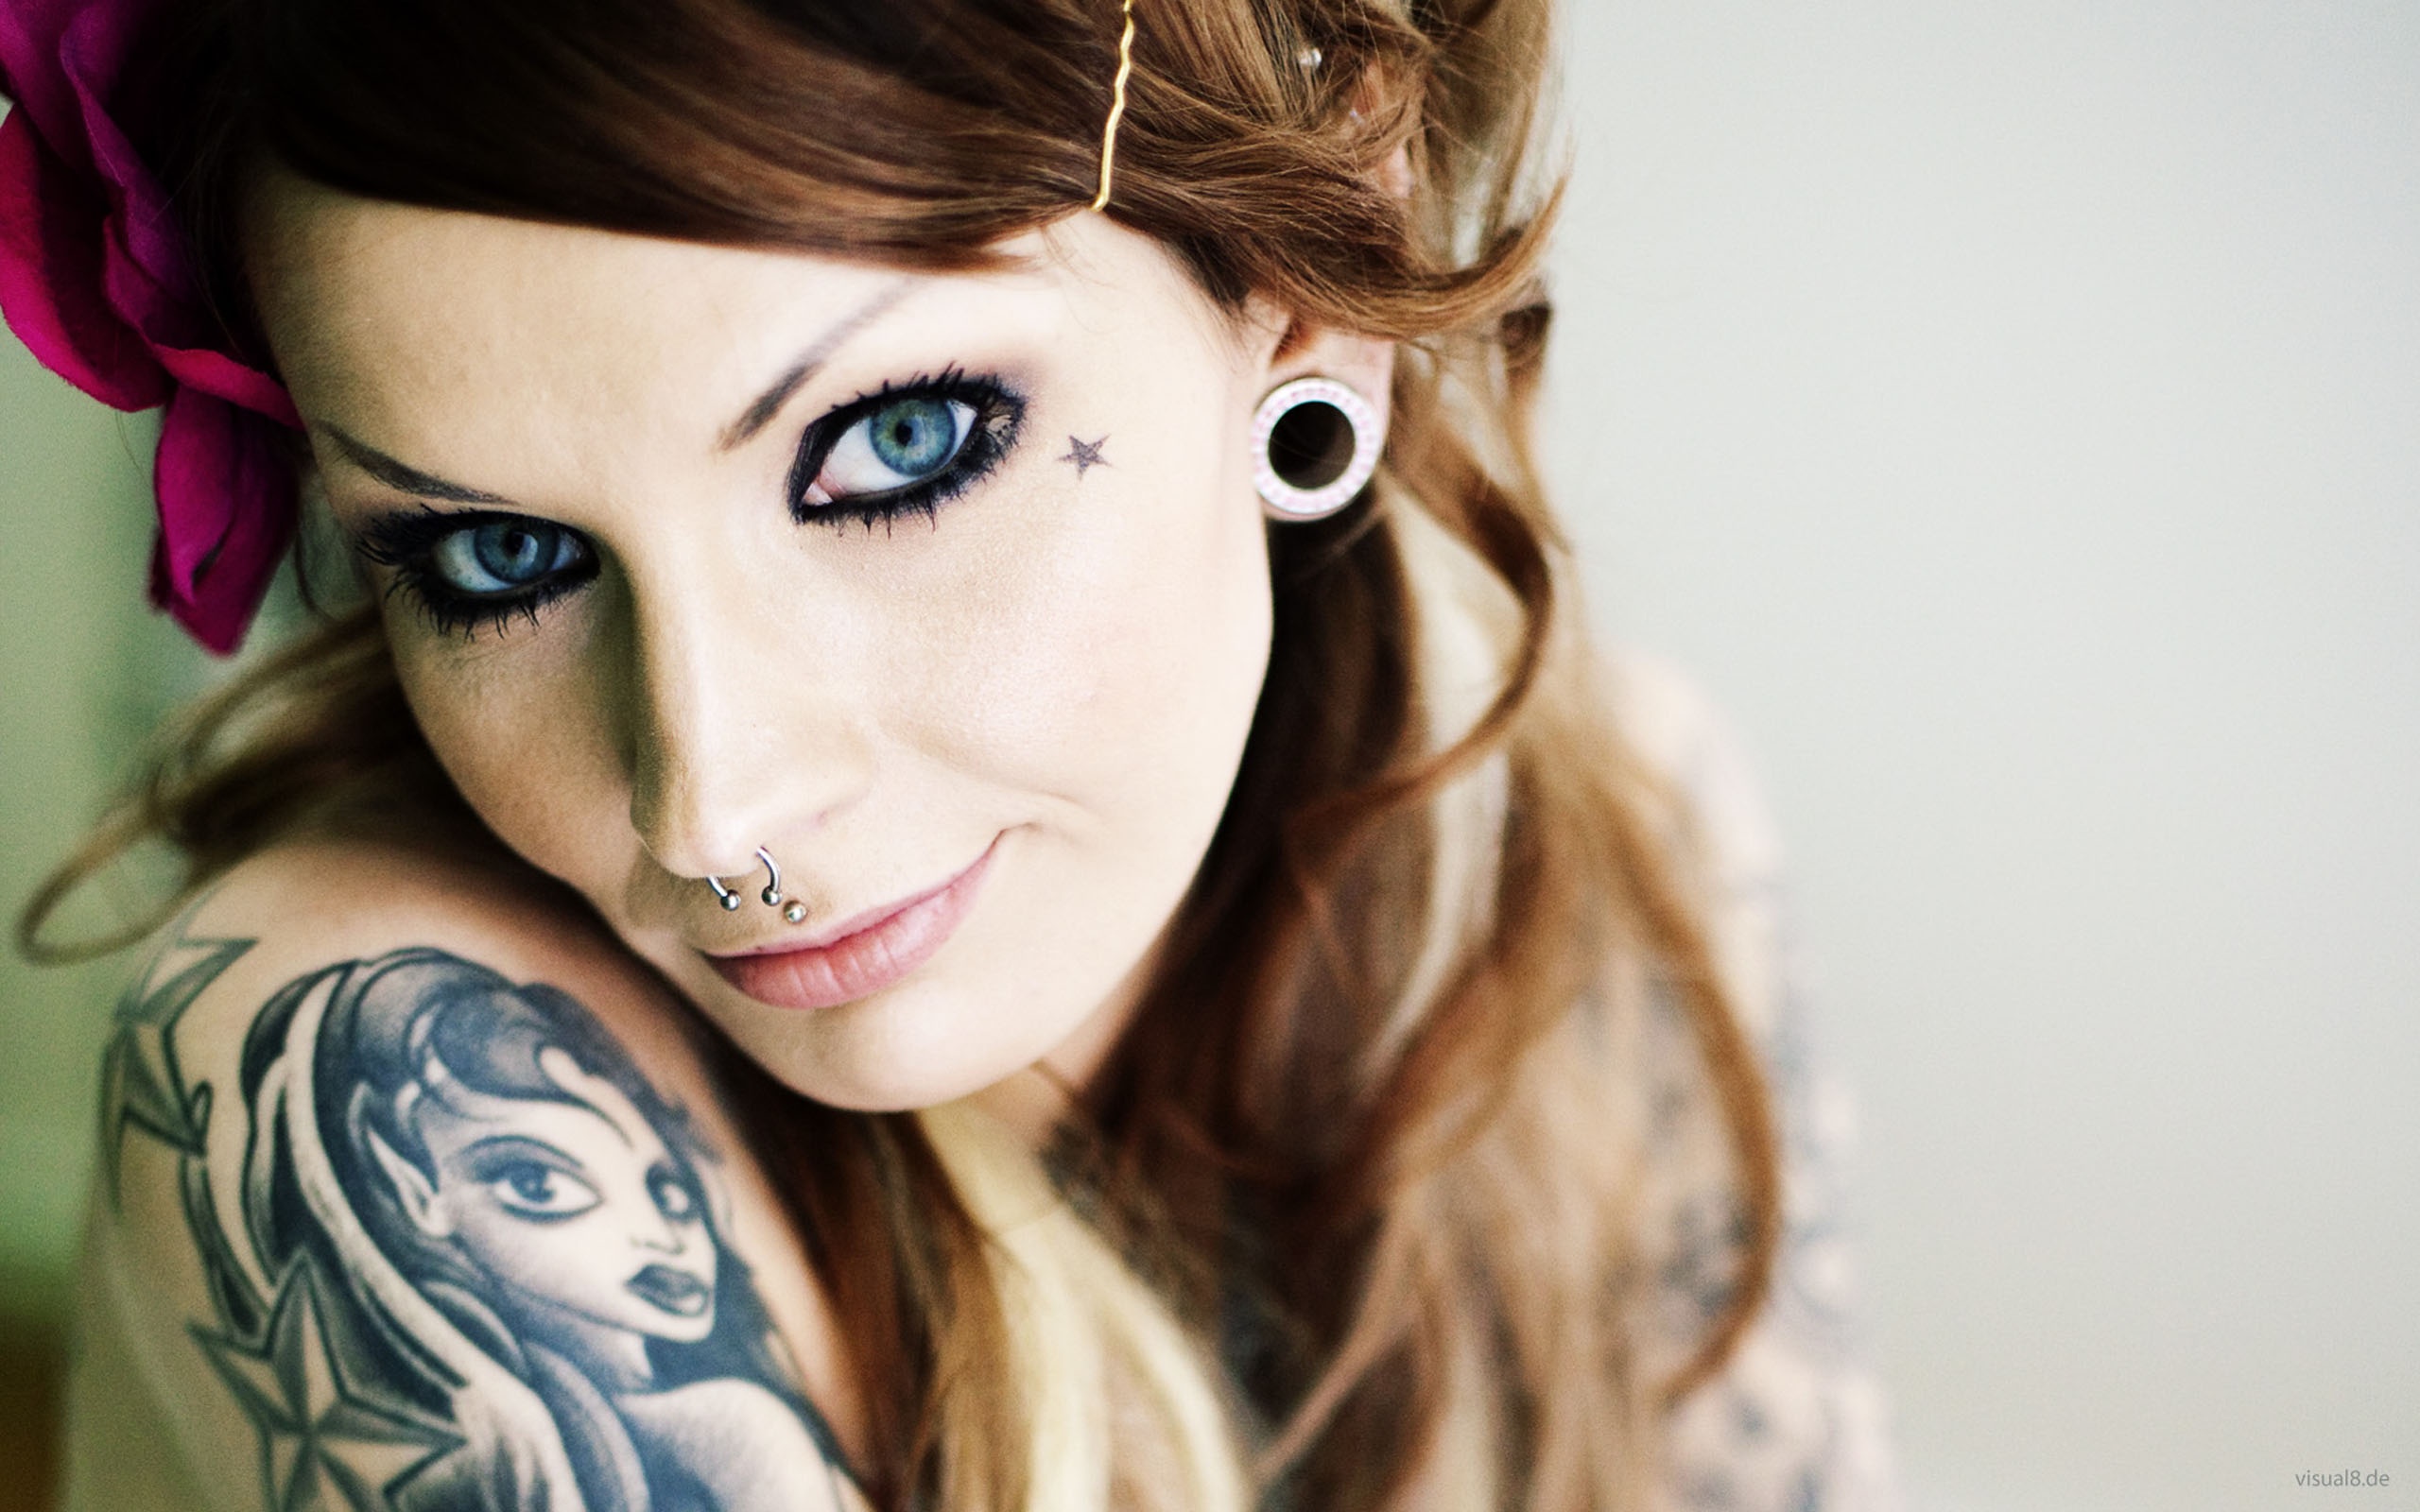 Girl With Tattoos And Piercings Wallpapers And Images Wallpapers Pictures Photos